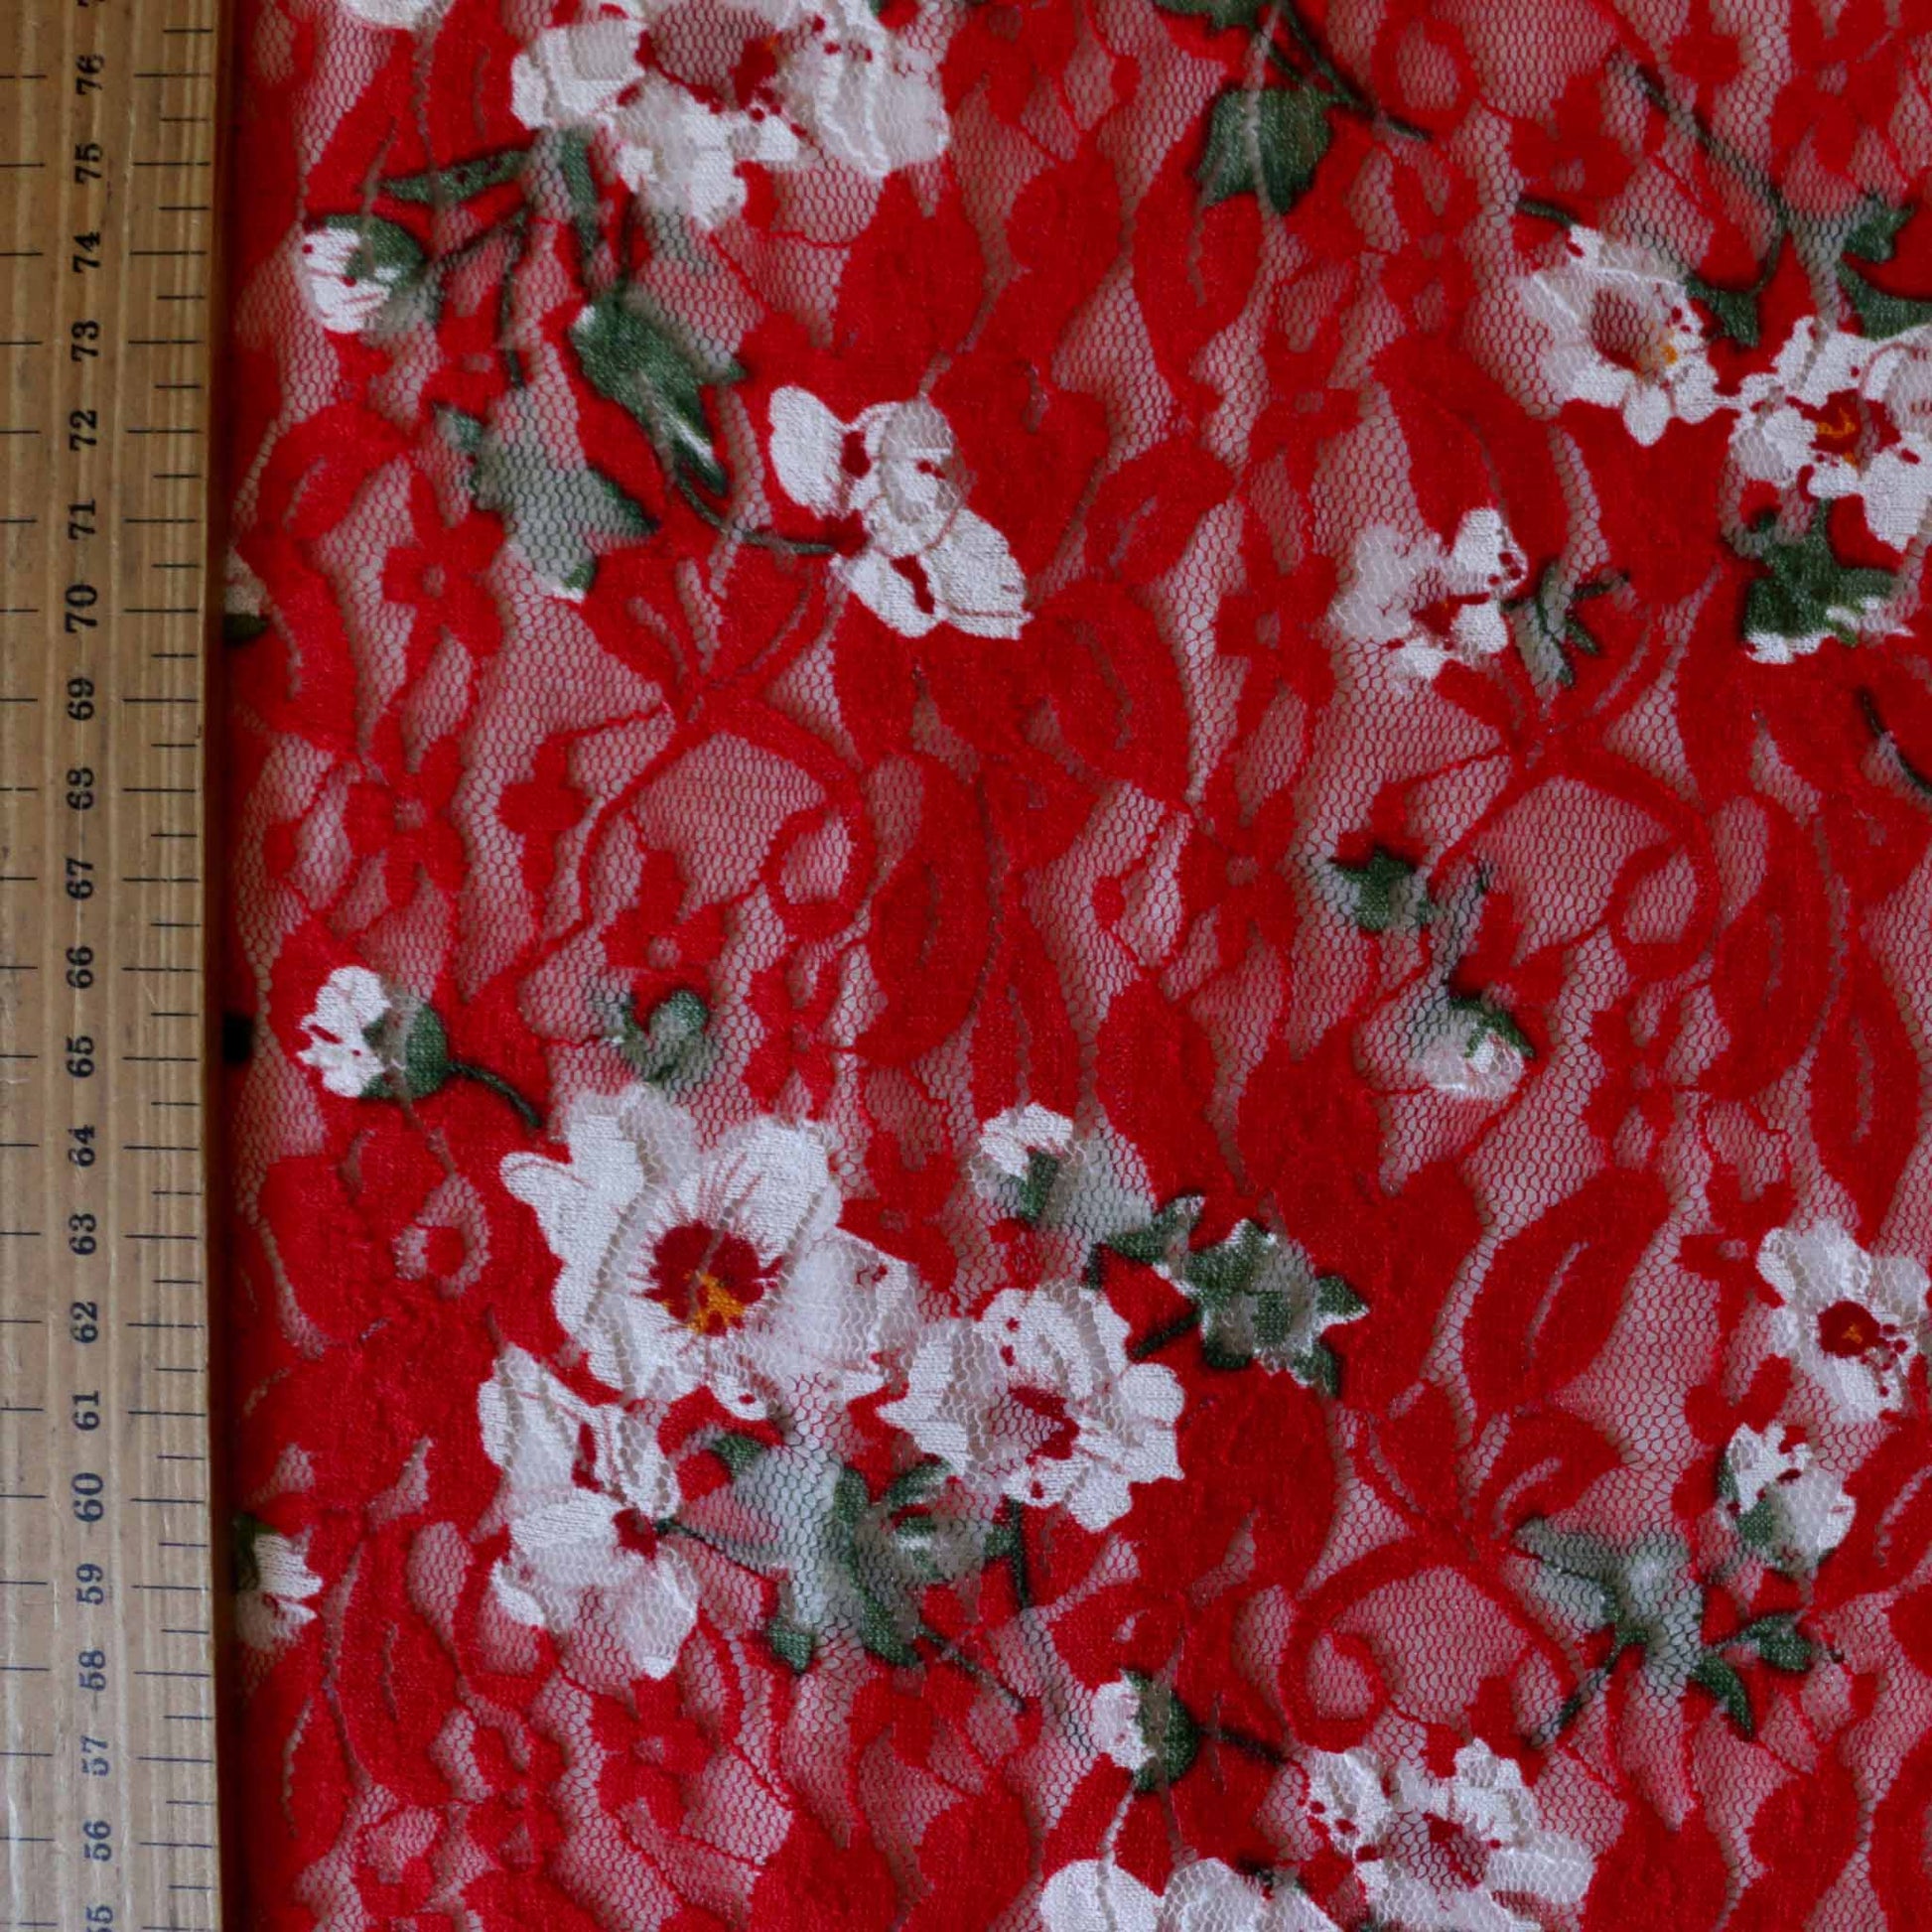 metre red stretchy floral lace dressmaking fabric with white flowers design